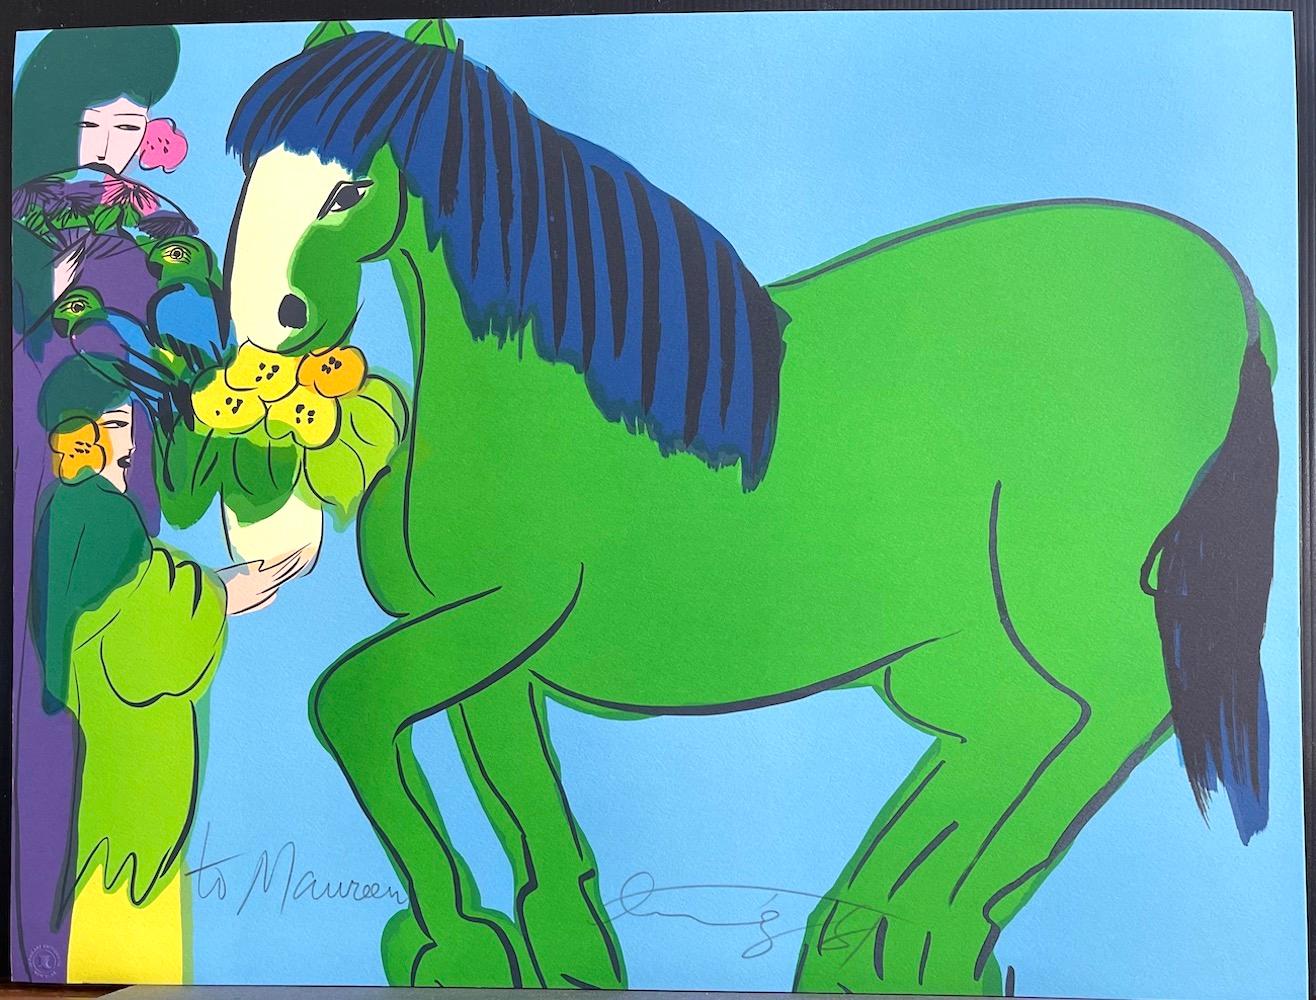 GREEN HORSE, TWO GEISHAS Signed Lithograph, Asian Women, Parrots, Flowers - Contemporary Print by Walasse Ting